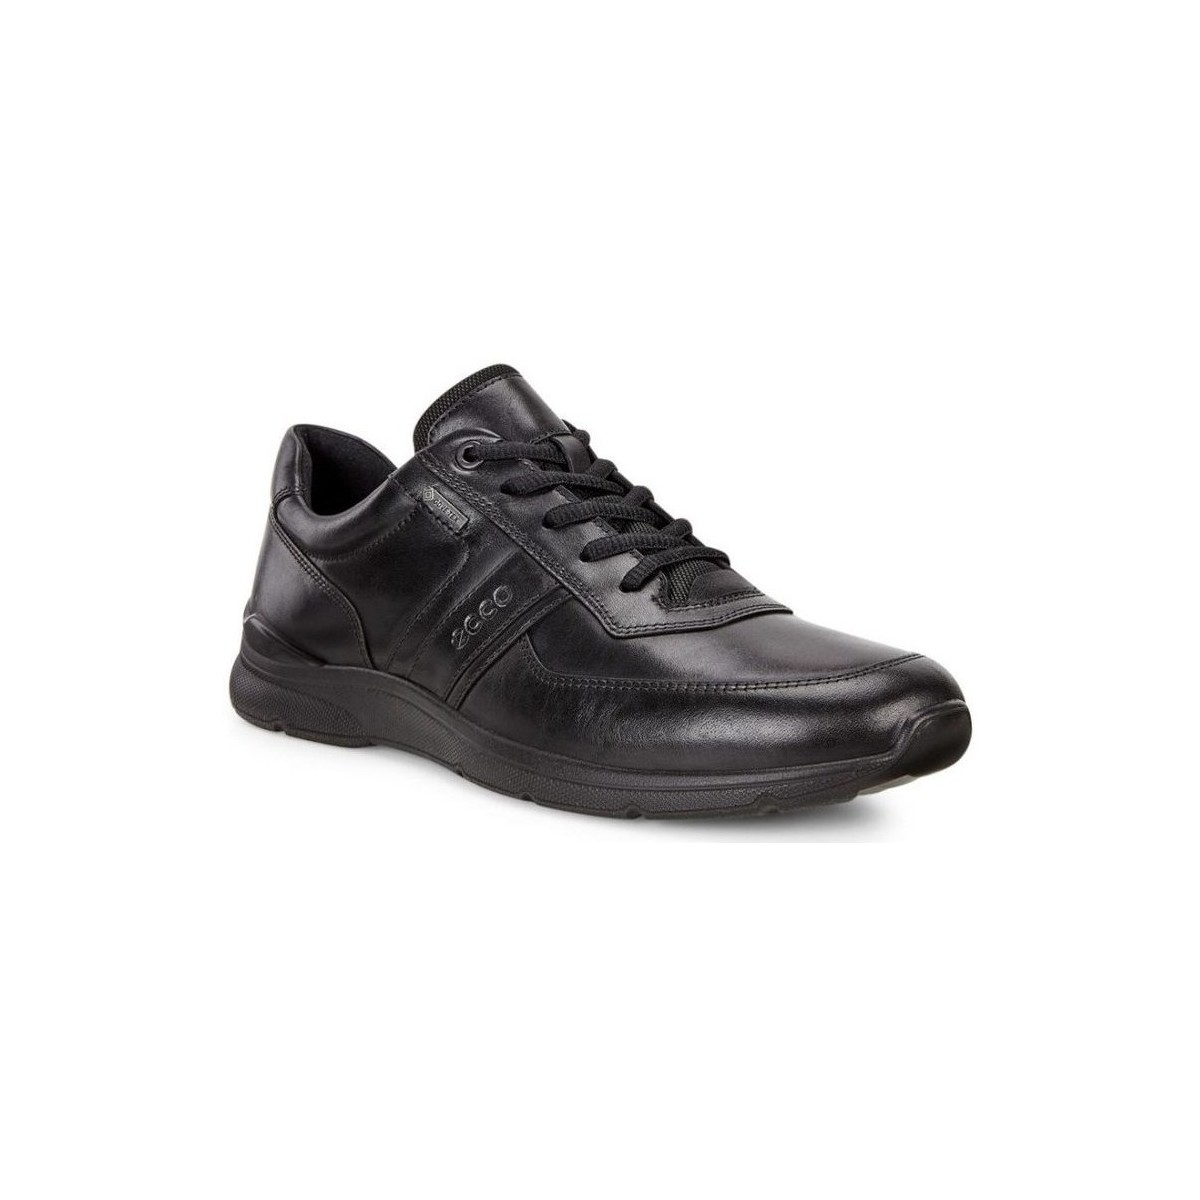 Chaussures Homme Baskets basses Ecco Irving Noir